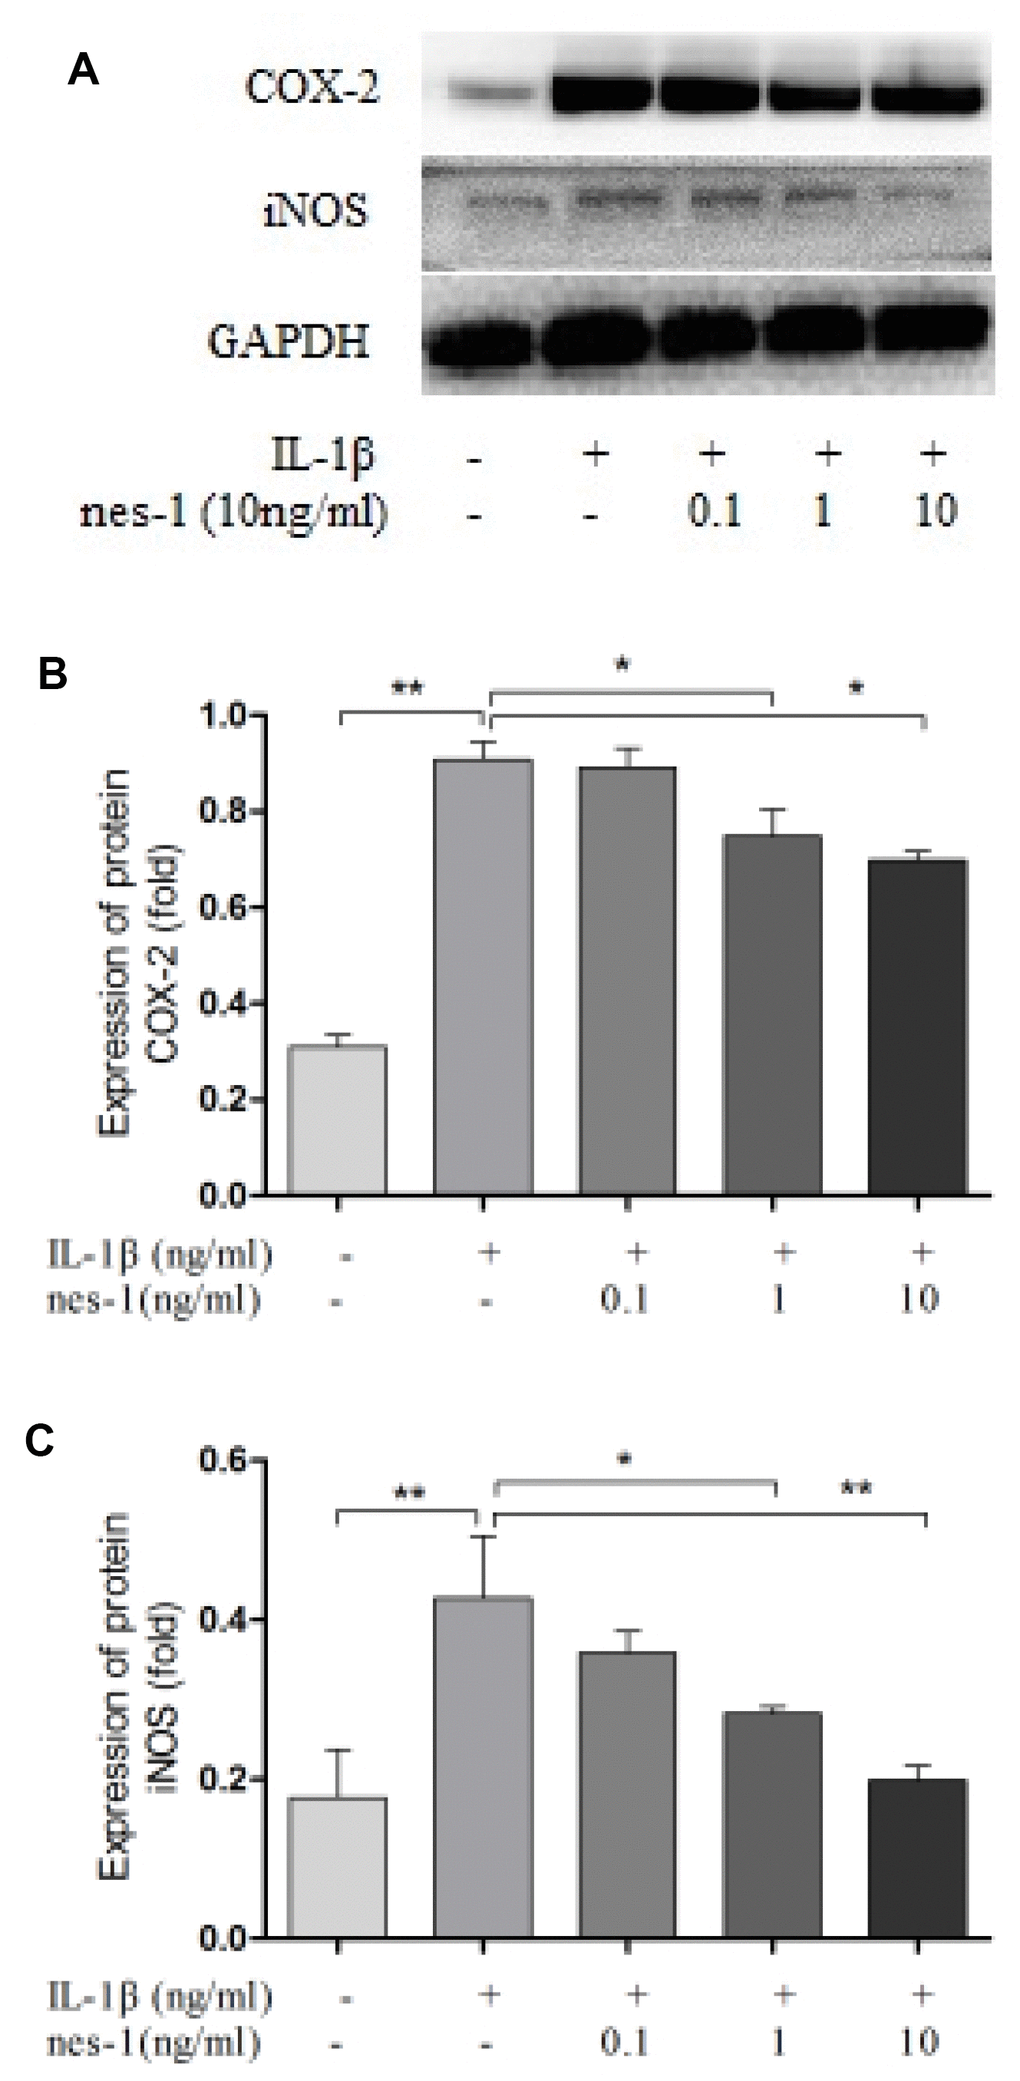 Nesfatin-1 suppressed the IL-1β-induced iNOS and COX-2 expression in rat chondrocytes. Chondrocytes were treated with different concentrations of nesfatin-1 on IL-1β-induced chondrocytes for 24 h. The protein levels of COX-2 and iNOS were evaluated via western blot analysis (A, B, and C). The values are expressed as mean ±SD (n=3) and were analyzed by one-way analysis of variance followed by Tukey's post hoc test. *p0.05, **p  0.01 versus the IL-1β group.